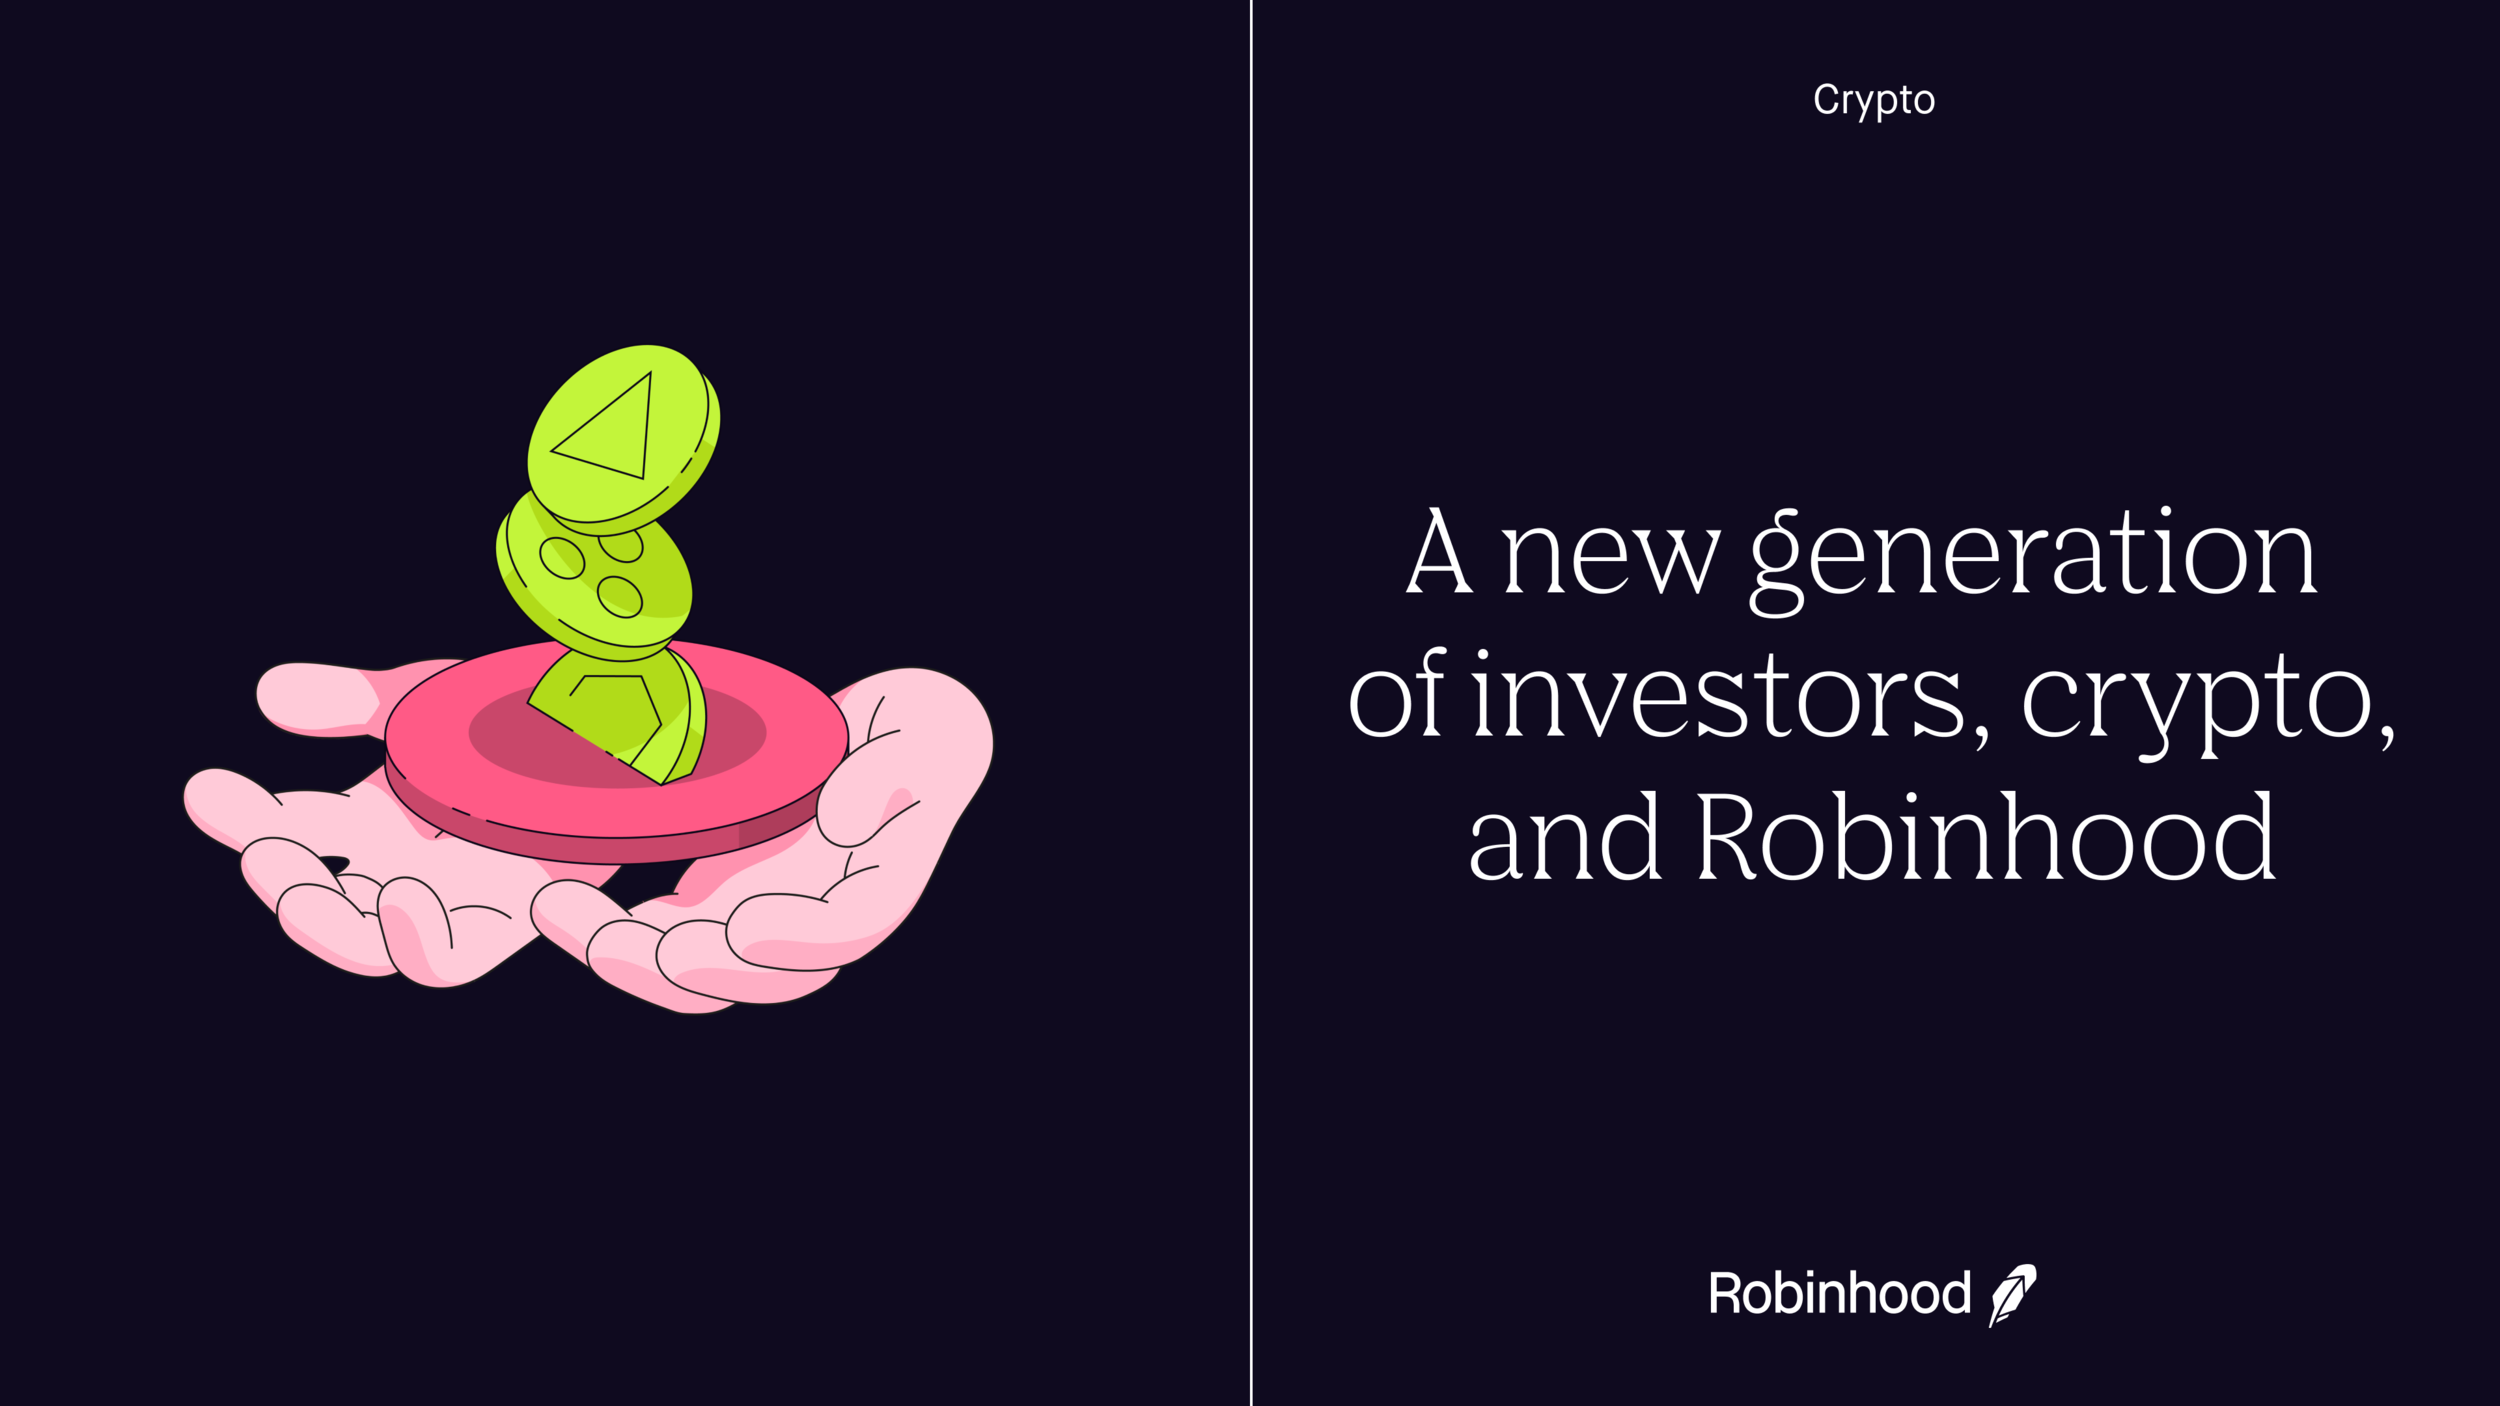 A new generation of investors, crypto, and Robinhood